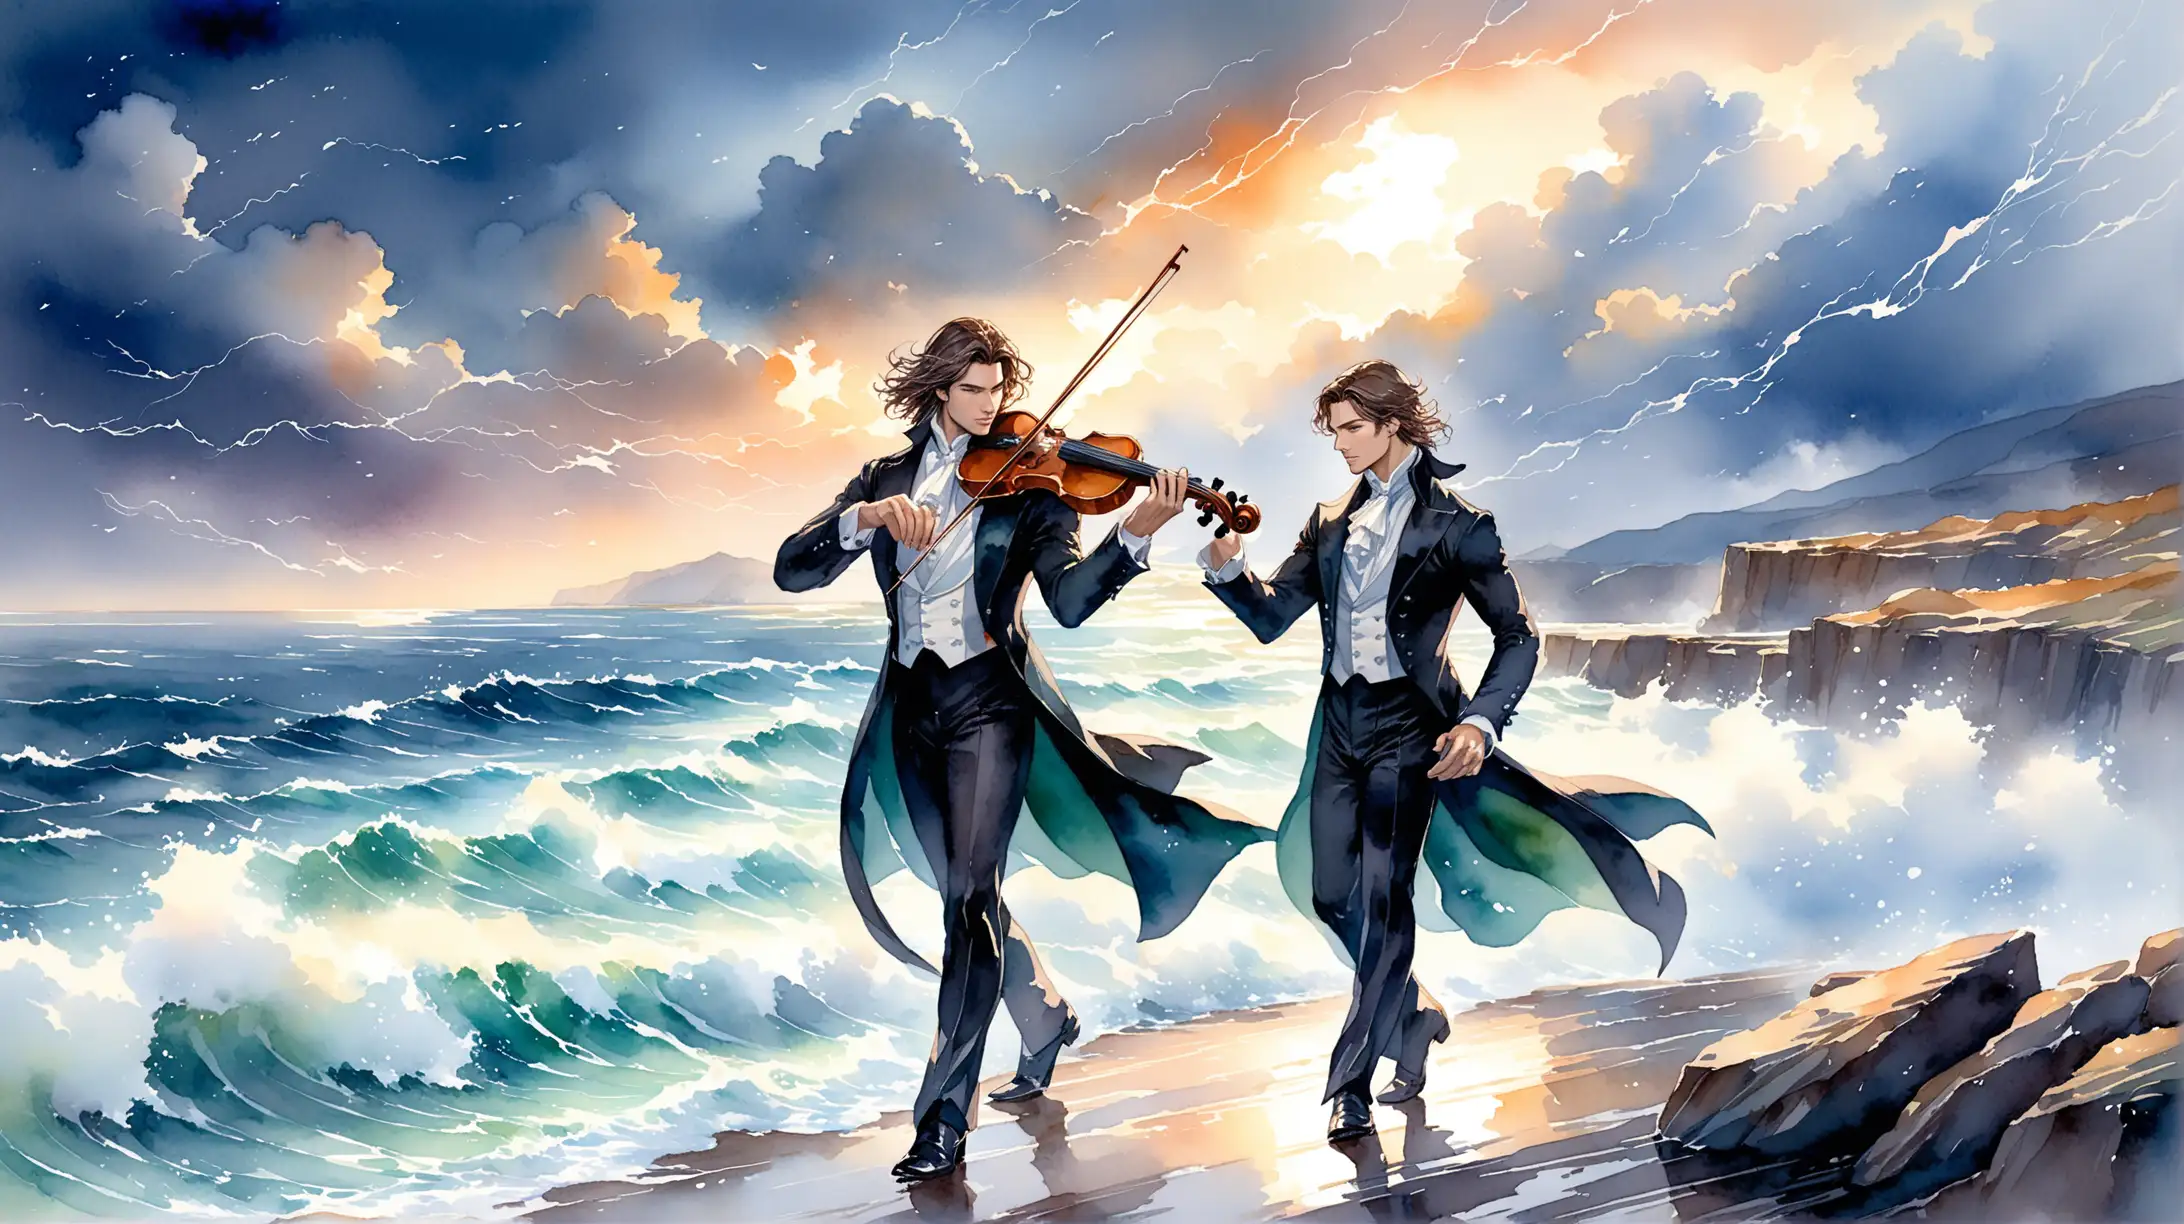 Romantic Watercolor Painting of Musicians by Stormy Seaside